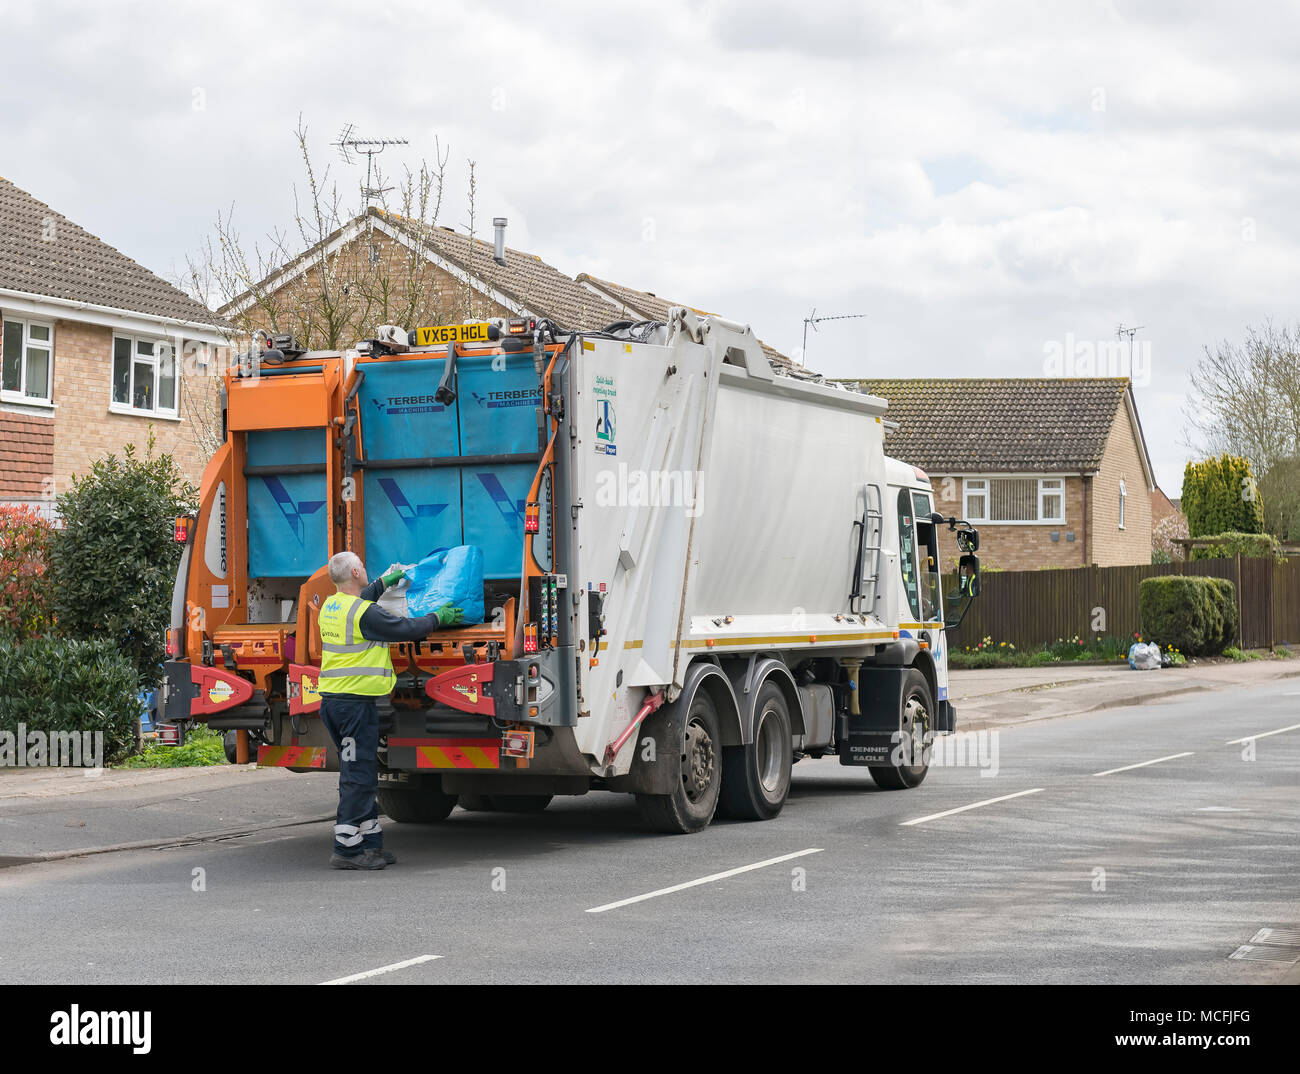 Dustcart used to collect recyclable rubbish Stock Photo